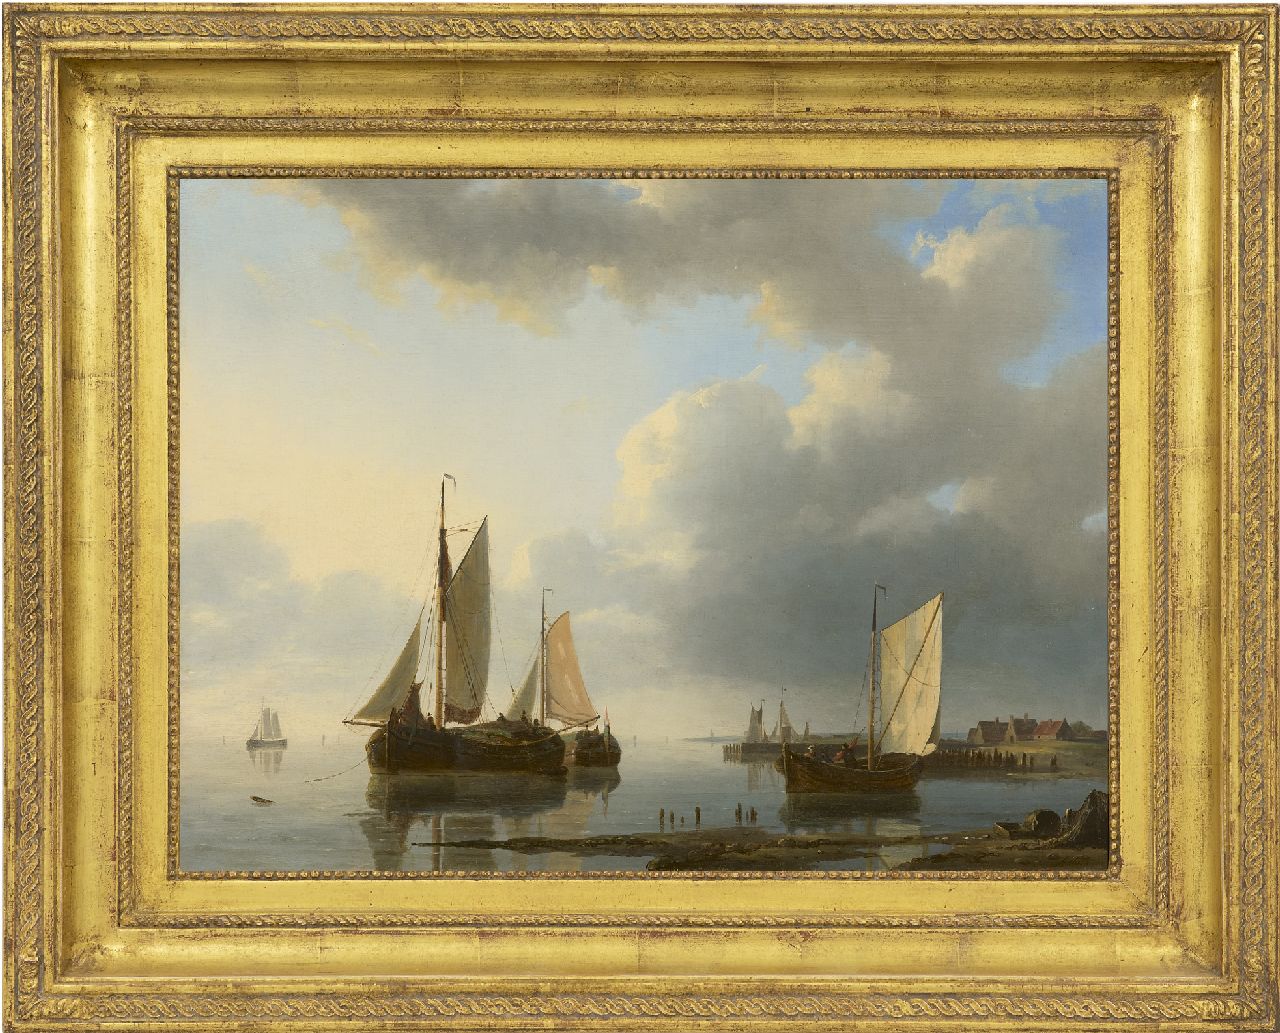 Hulk A.  | Abraham Hulk, Moored sailing ships in a calm sea, oil on panel 34.0 x 45.0 cm, signed l.r.